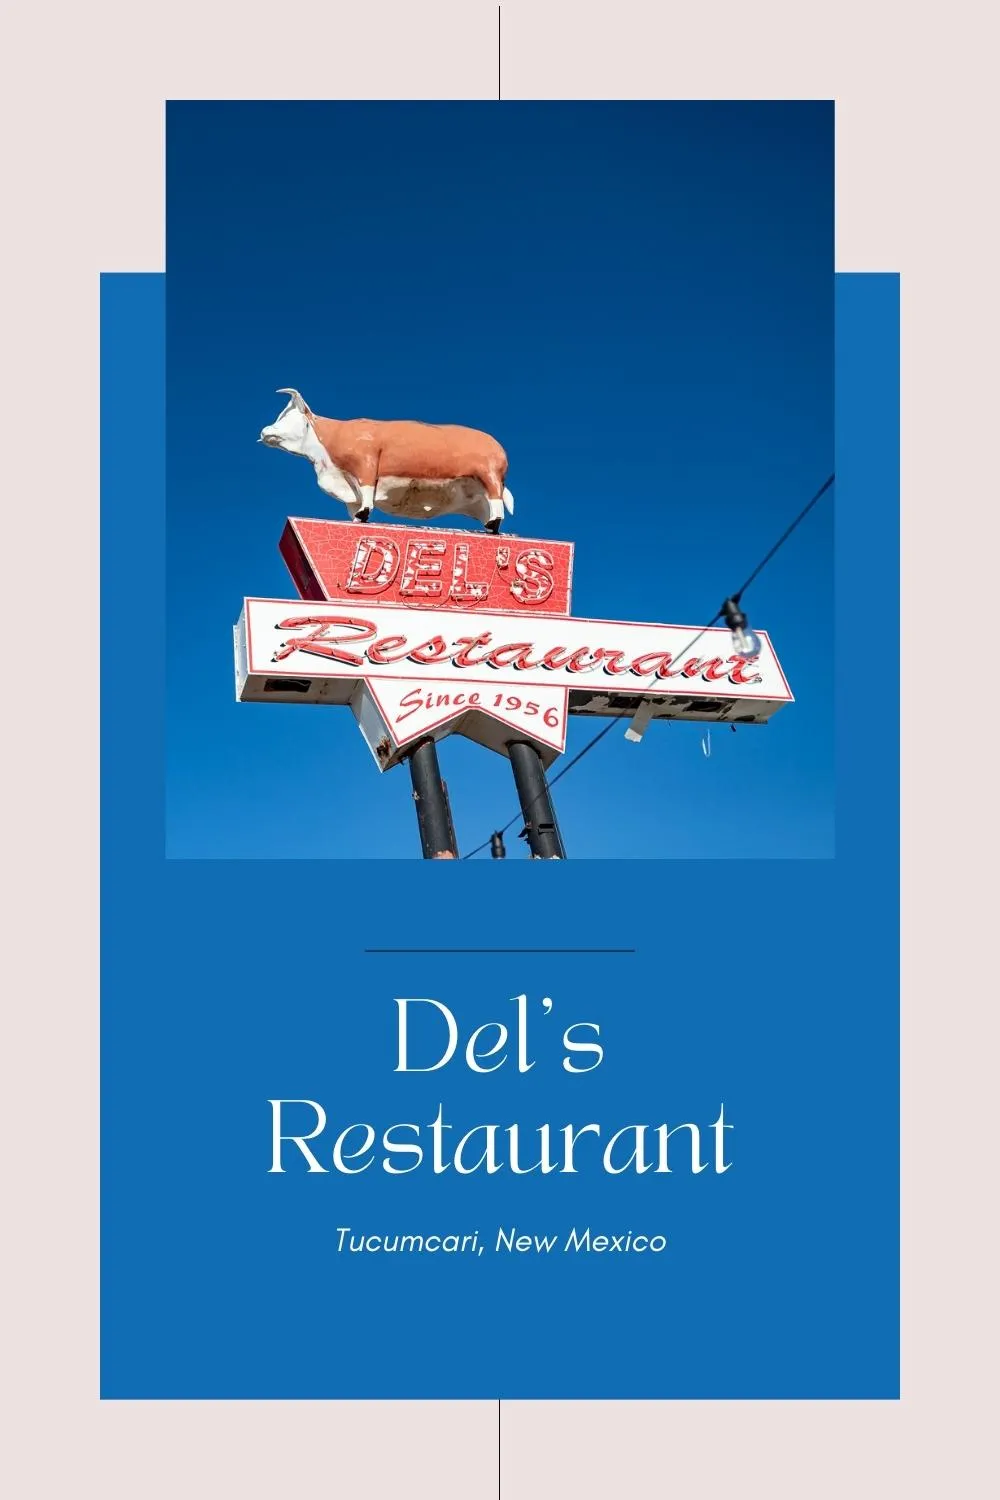 If you're planning on staying in "Tucumcari Tonite" on your Route 66 road trip, you're going to need to eat. And I know just the place to have a satisfying lunch or dinner with a nostalgic twist. Del's Restaurant in Tucumcari, New Mexico has something for everyone. Just look for the iconic neon sign topped with a cow! Visit this fun Route 66 roadside attraction on your New Mexico road trip. #Route66 #Route66RoadTrip #RoadTrip #NewMexico #NewMexicoRoadTrip #RoadsideAttraction